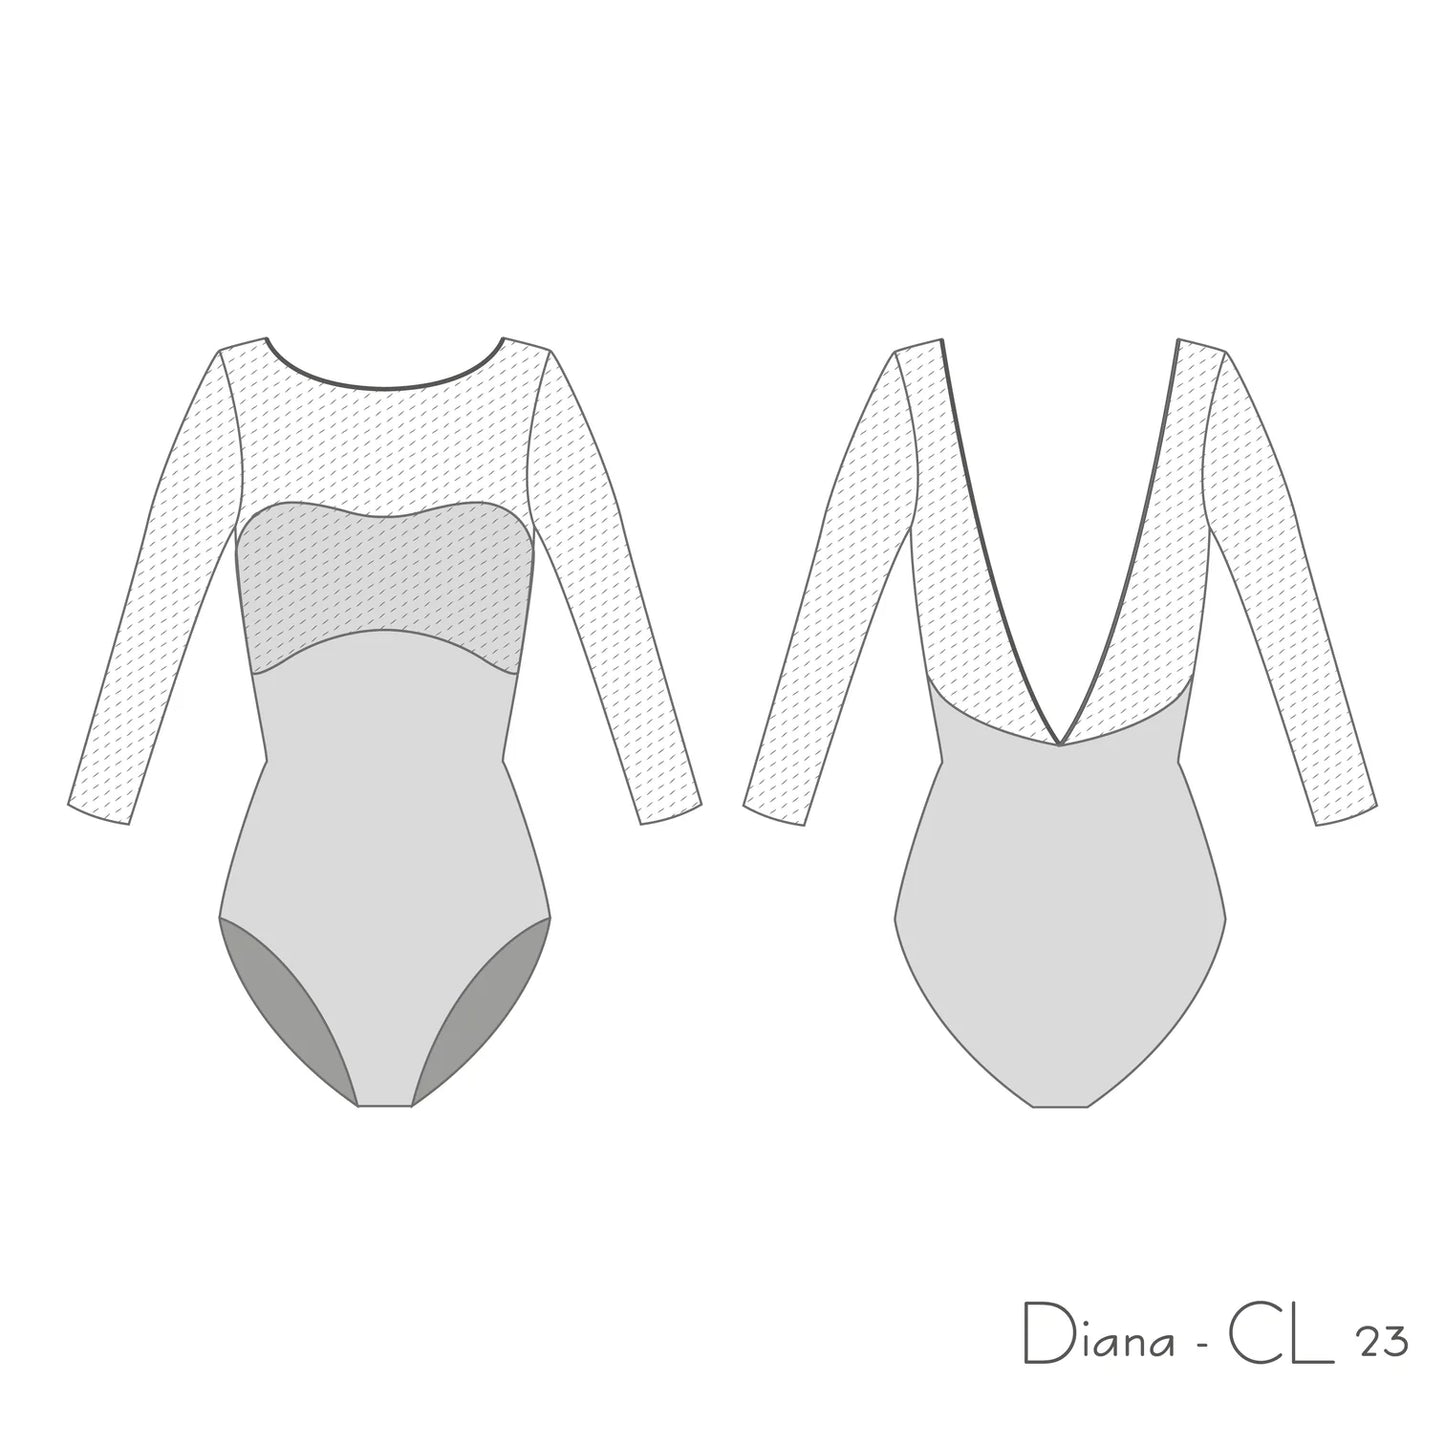 Dellalo Milano Diana sleeved ballet dance leotard from The Collective Dancewear